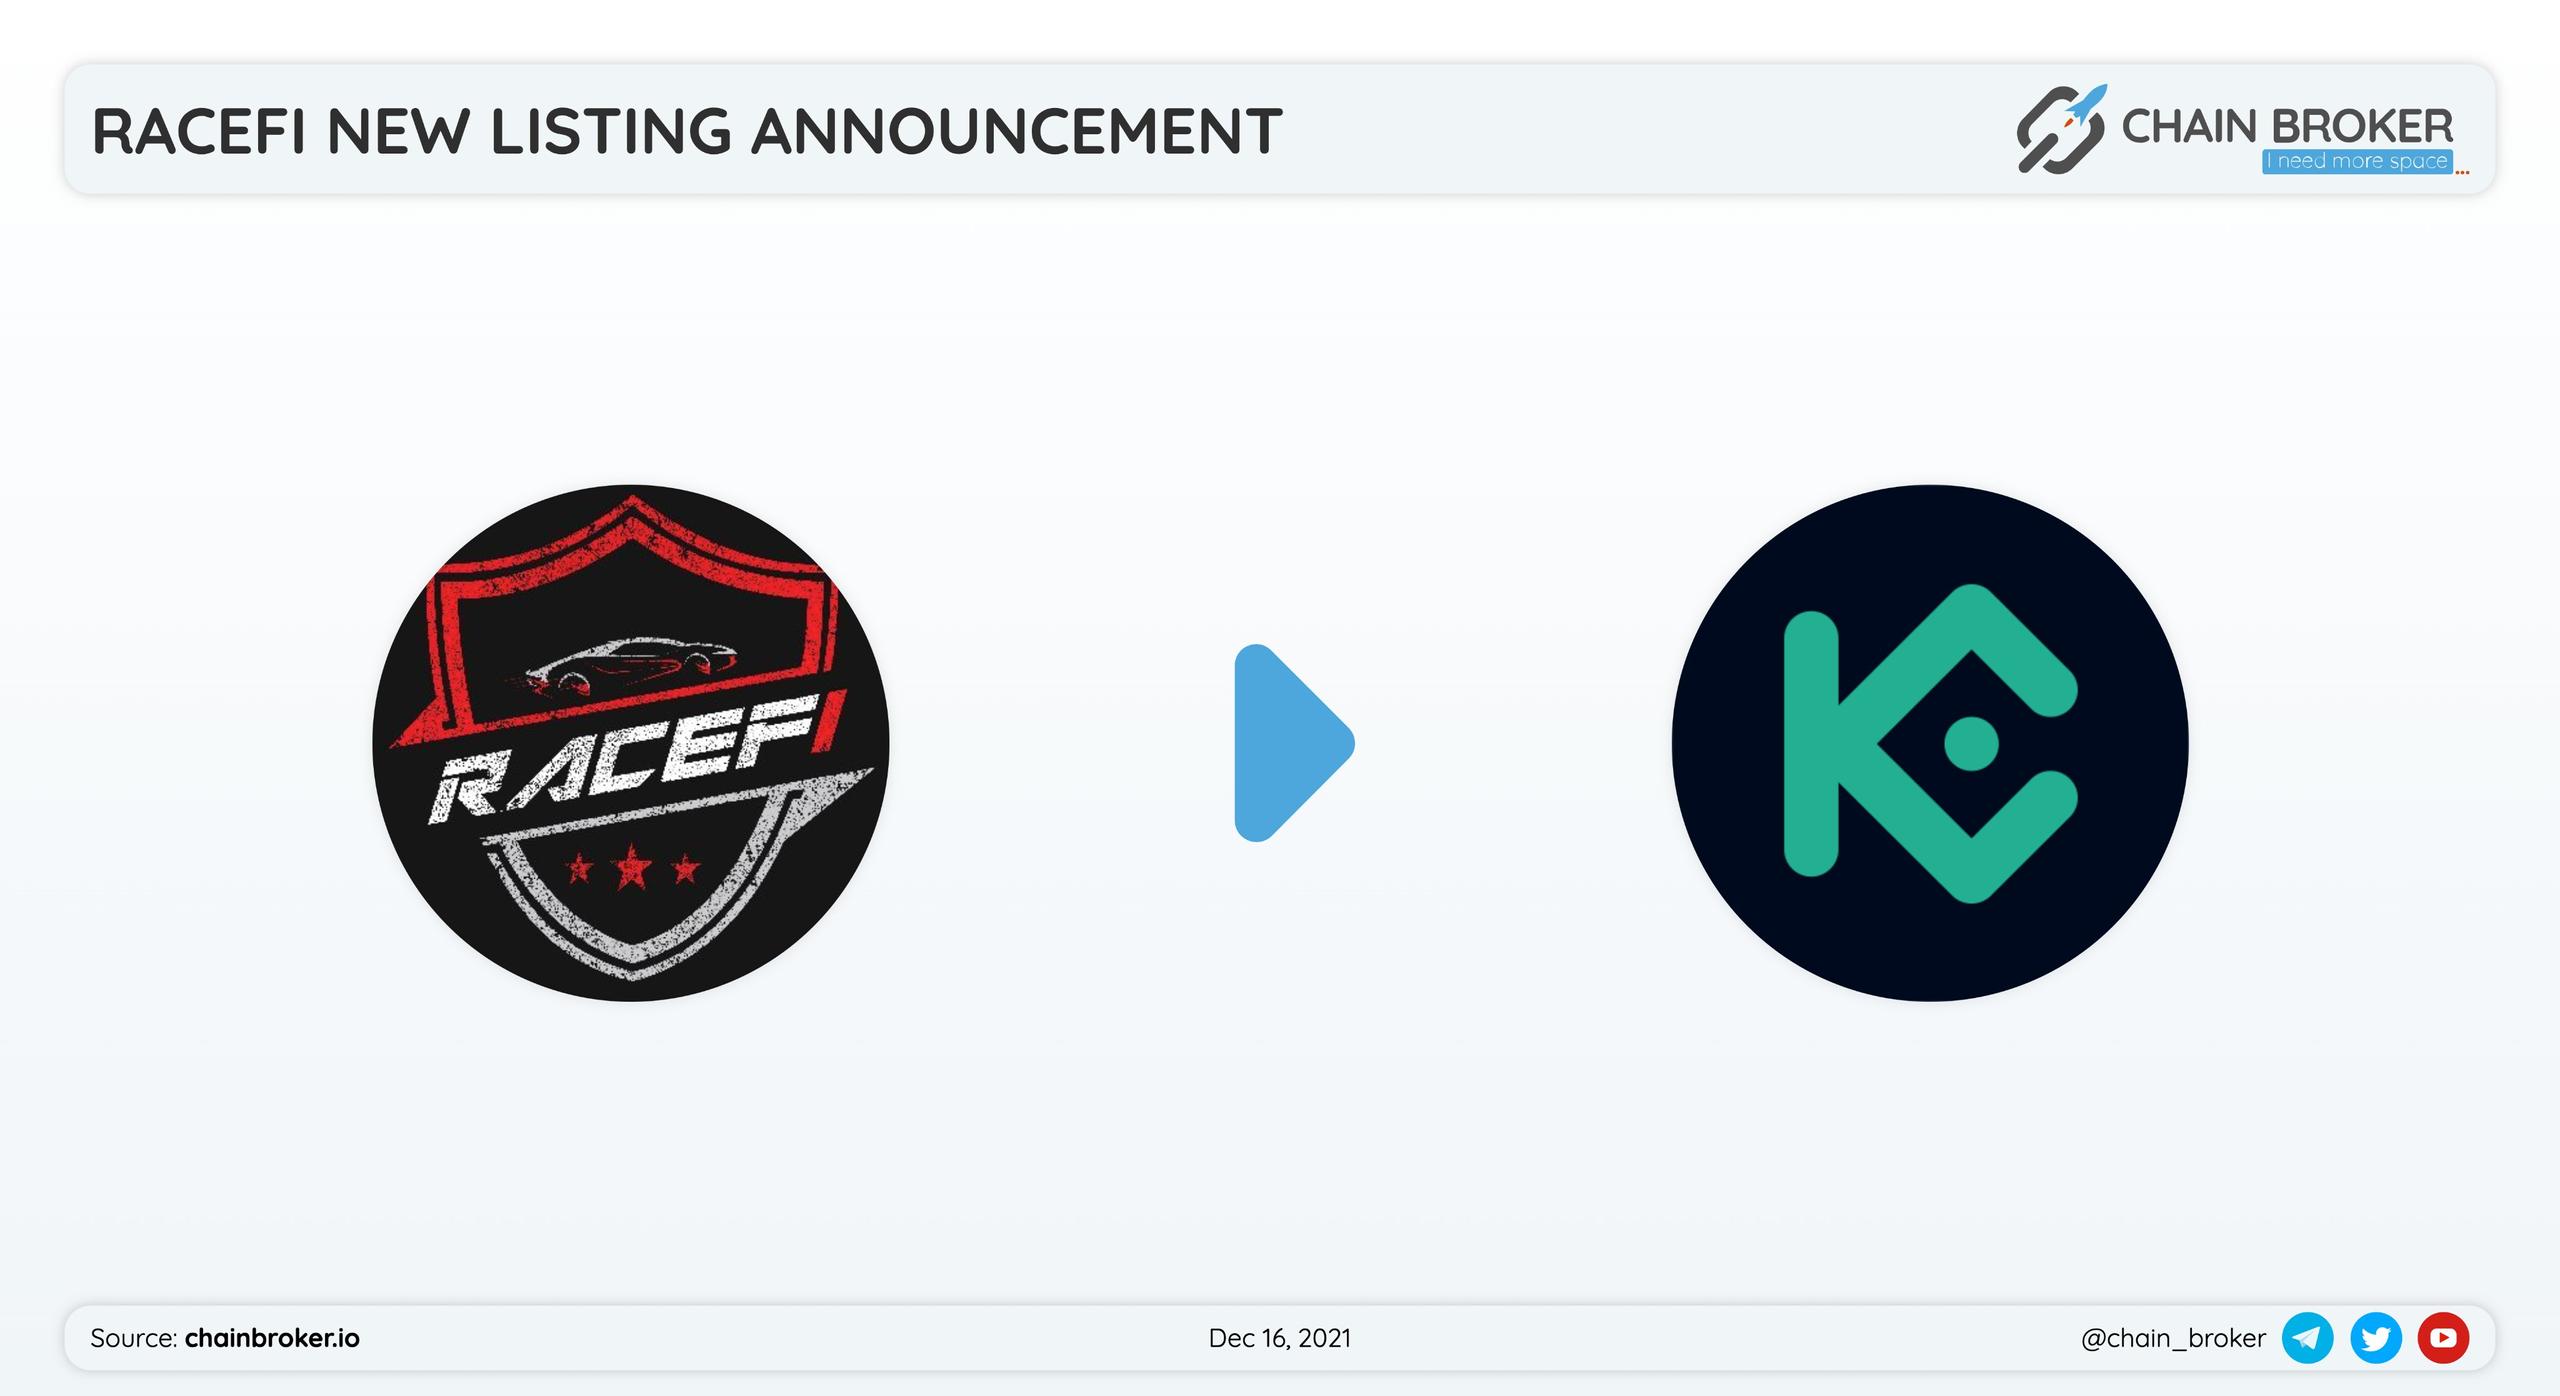 Racefi has partnered with Kucoin for a token listing.